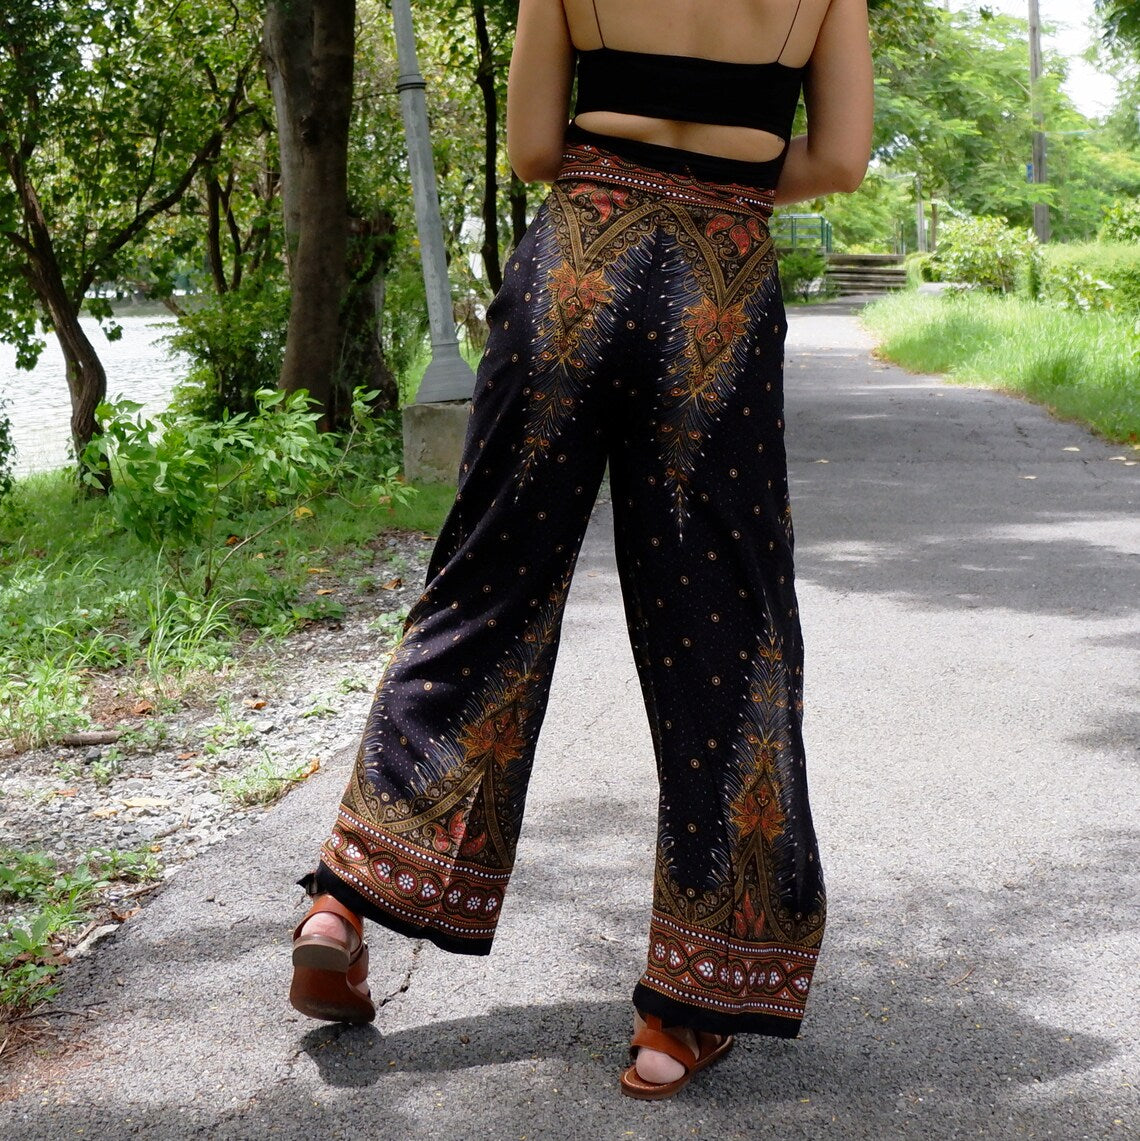 Fashion-forward black boho feather print wrap pants paired with a sleek black top, perfect for a stylish outdoor ensemble.